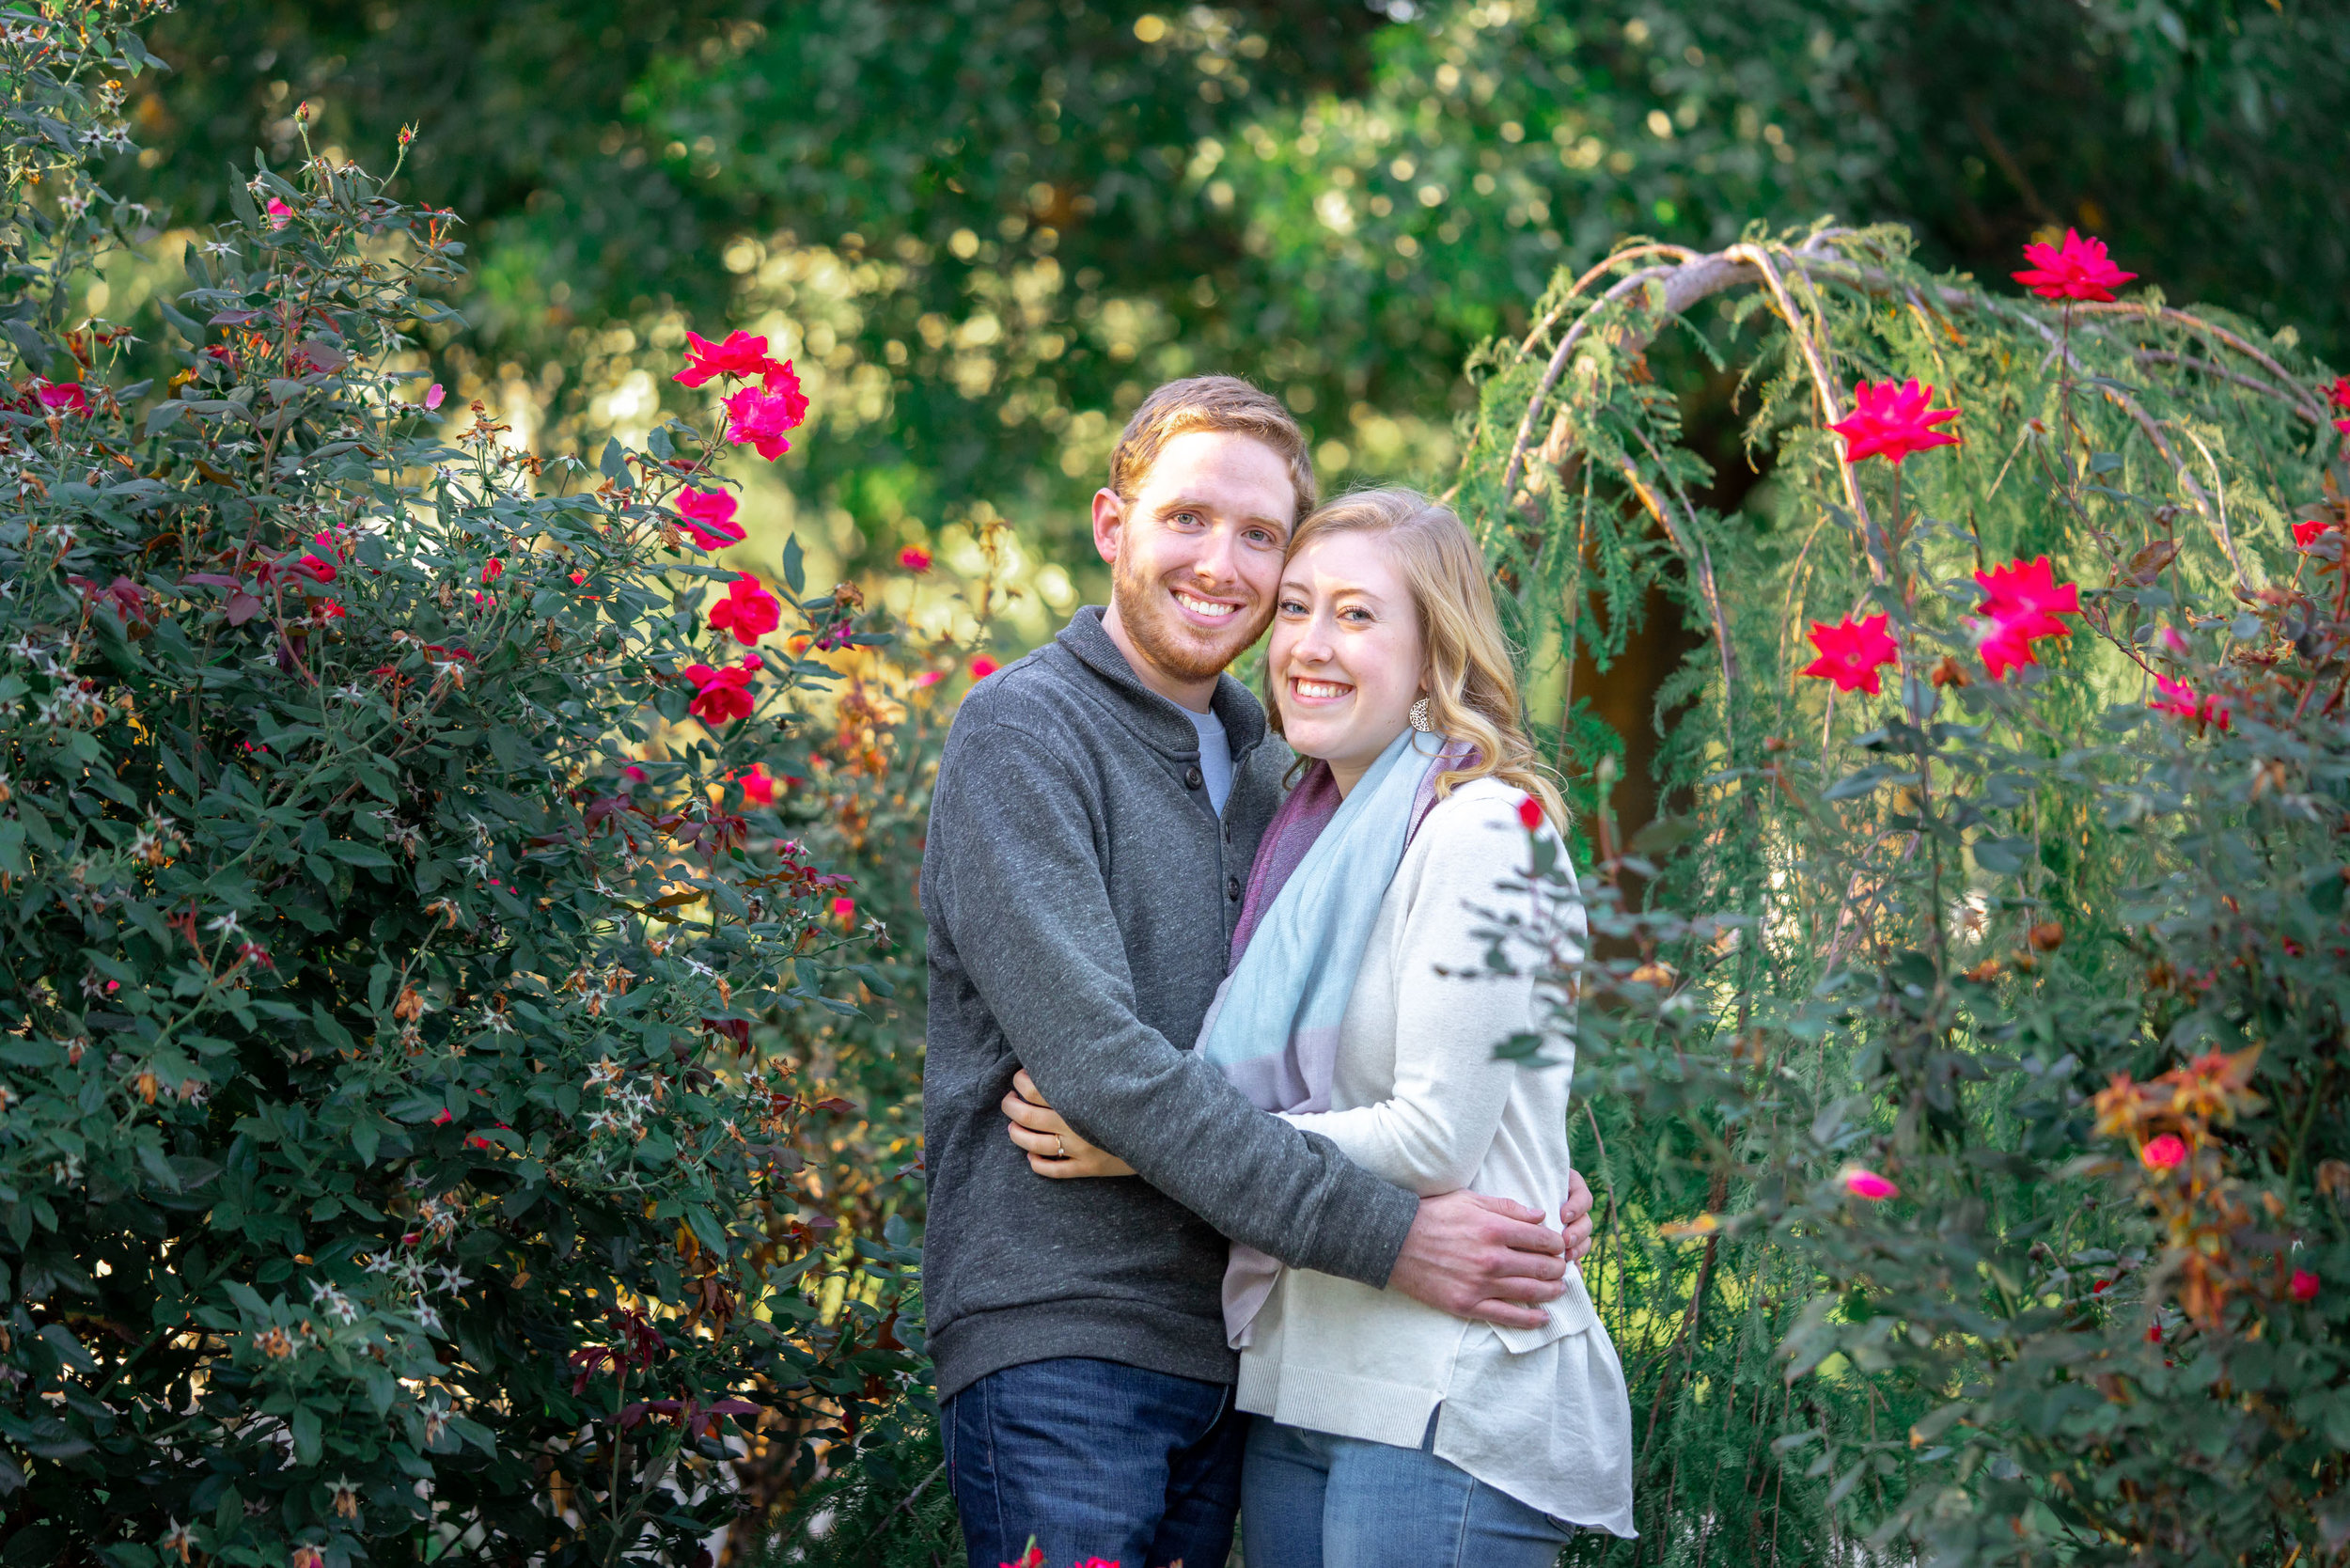 Engagement photos in the rose bushes at Federal Hill Park in Baltimore